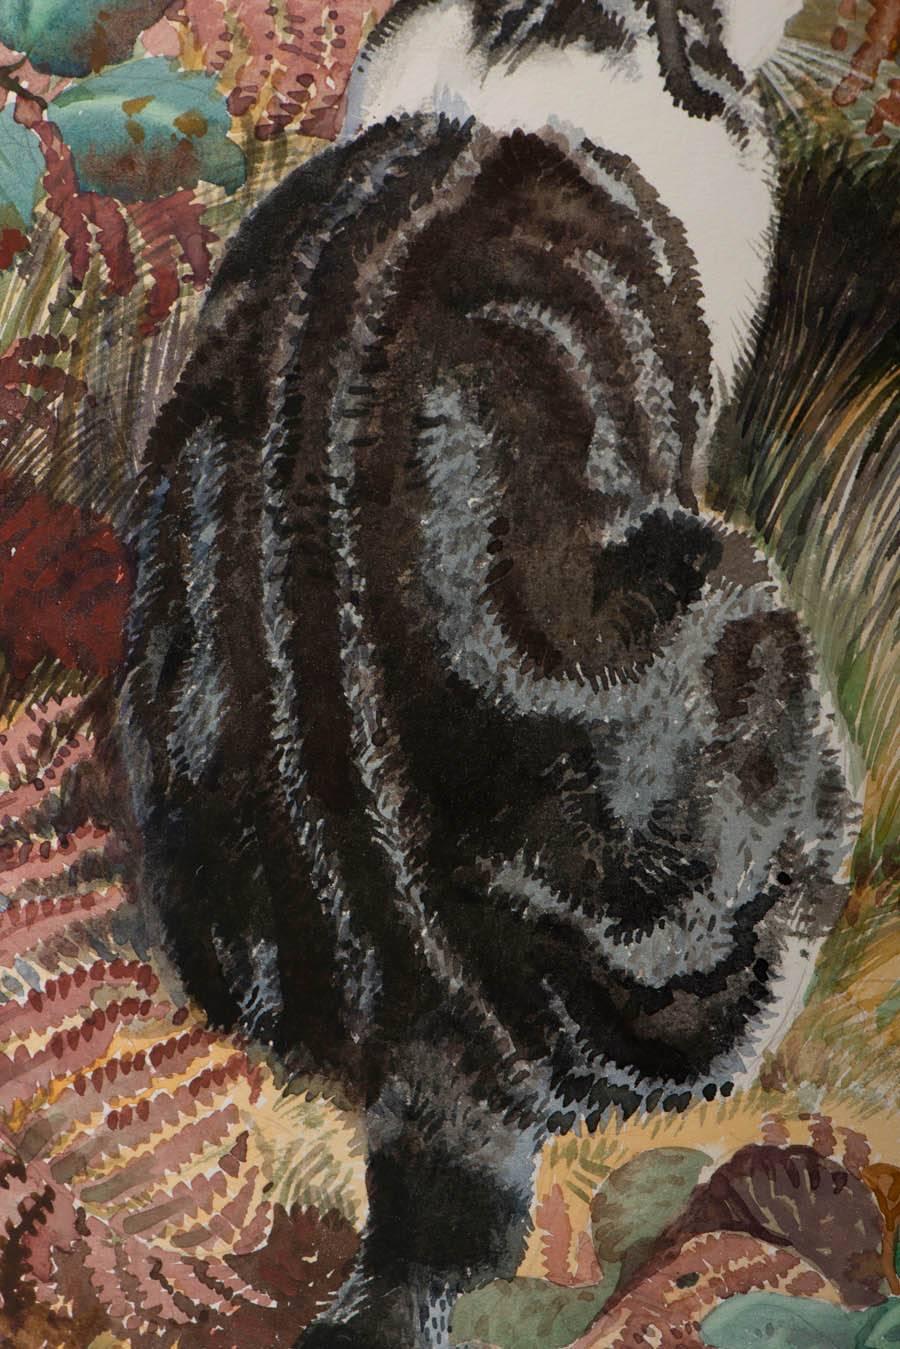 Late 20th Century Tunnicliffe watercolour painting “Cat among Ferns”, England circa 1970